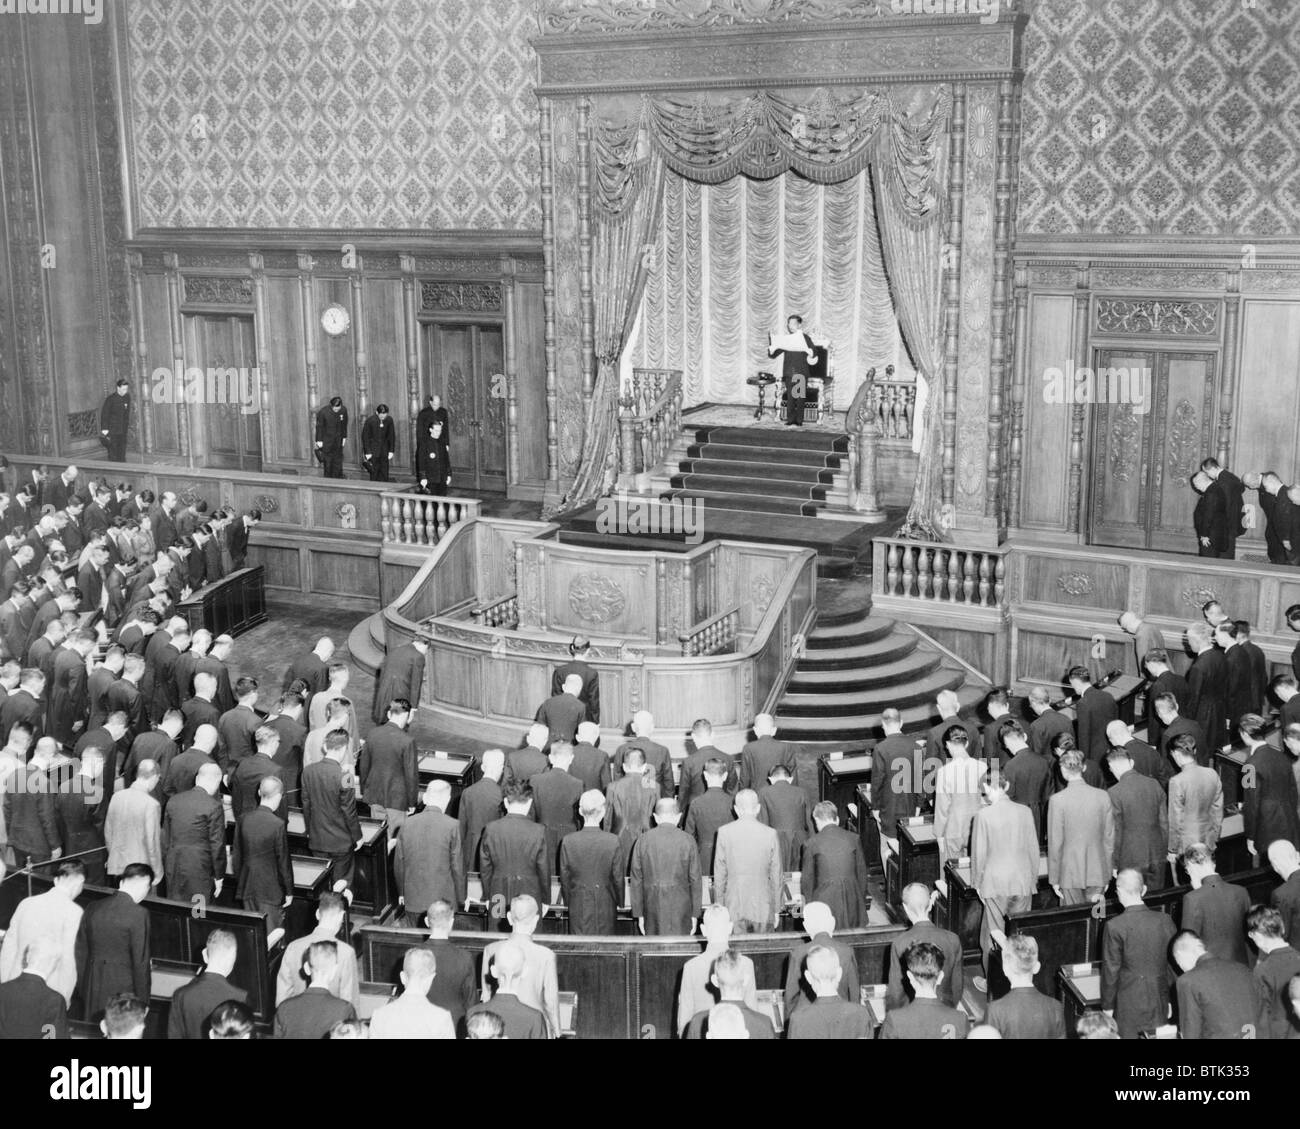 Emperor Hirohito (1901-1989) standing opening the 90th session of the Japanese Diet in June 20, 1946. Following World War II Hirohito assumed to role of a non-divine constitutional monarch. Stock Photo